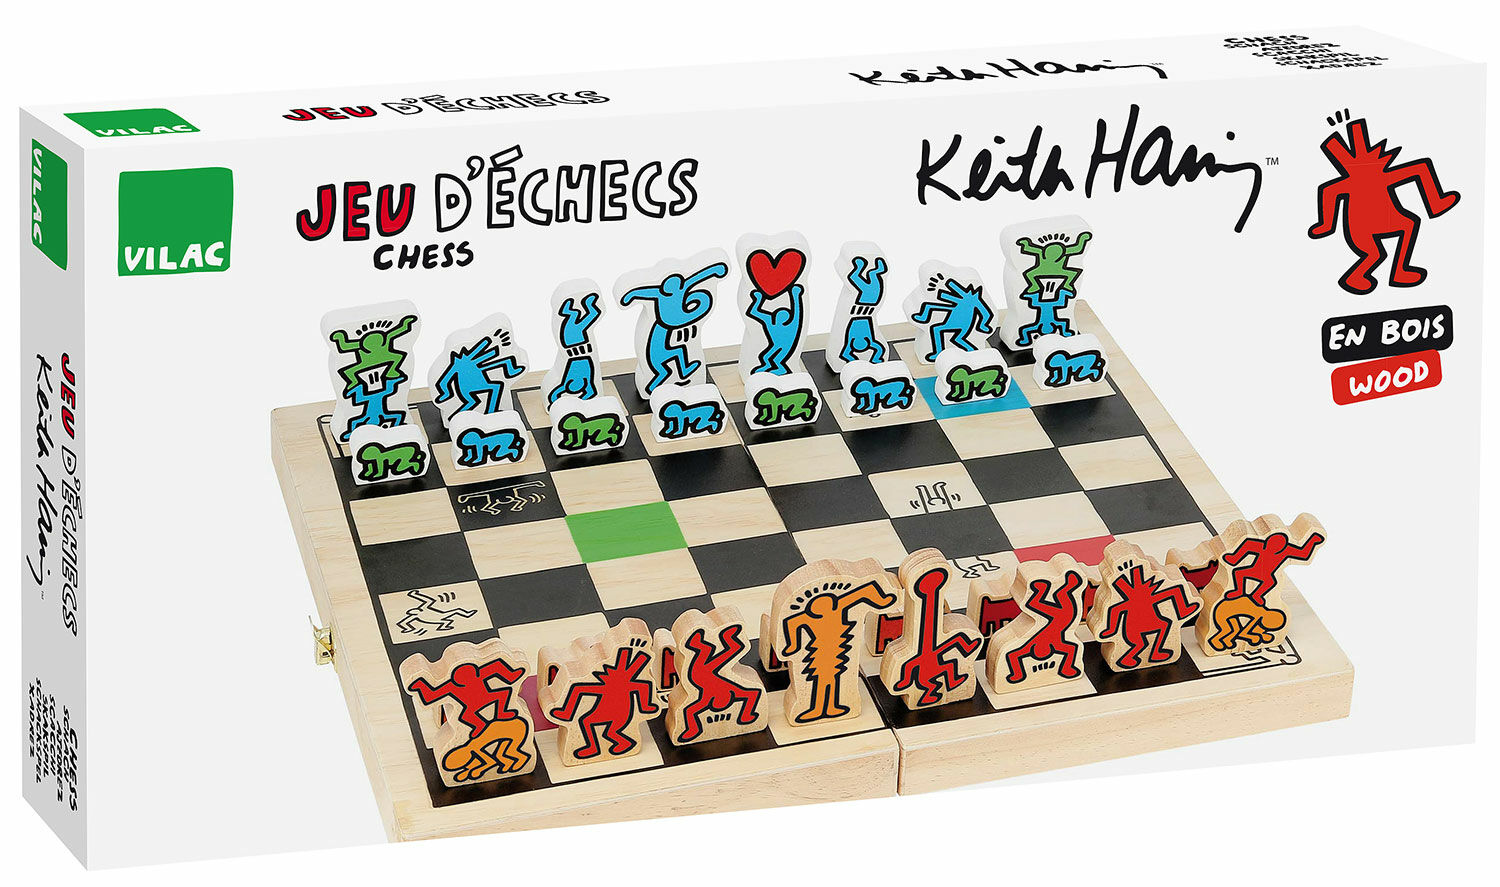 Chess set "Keith Haring", colourful version